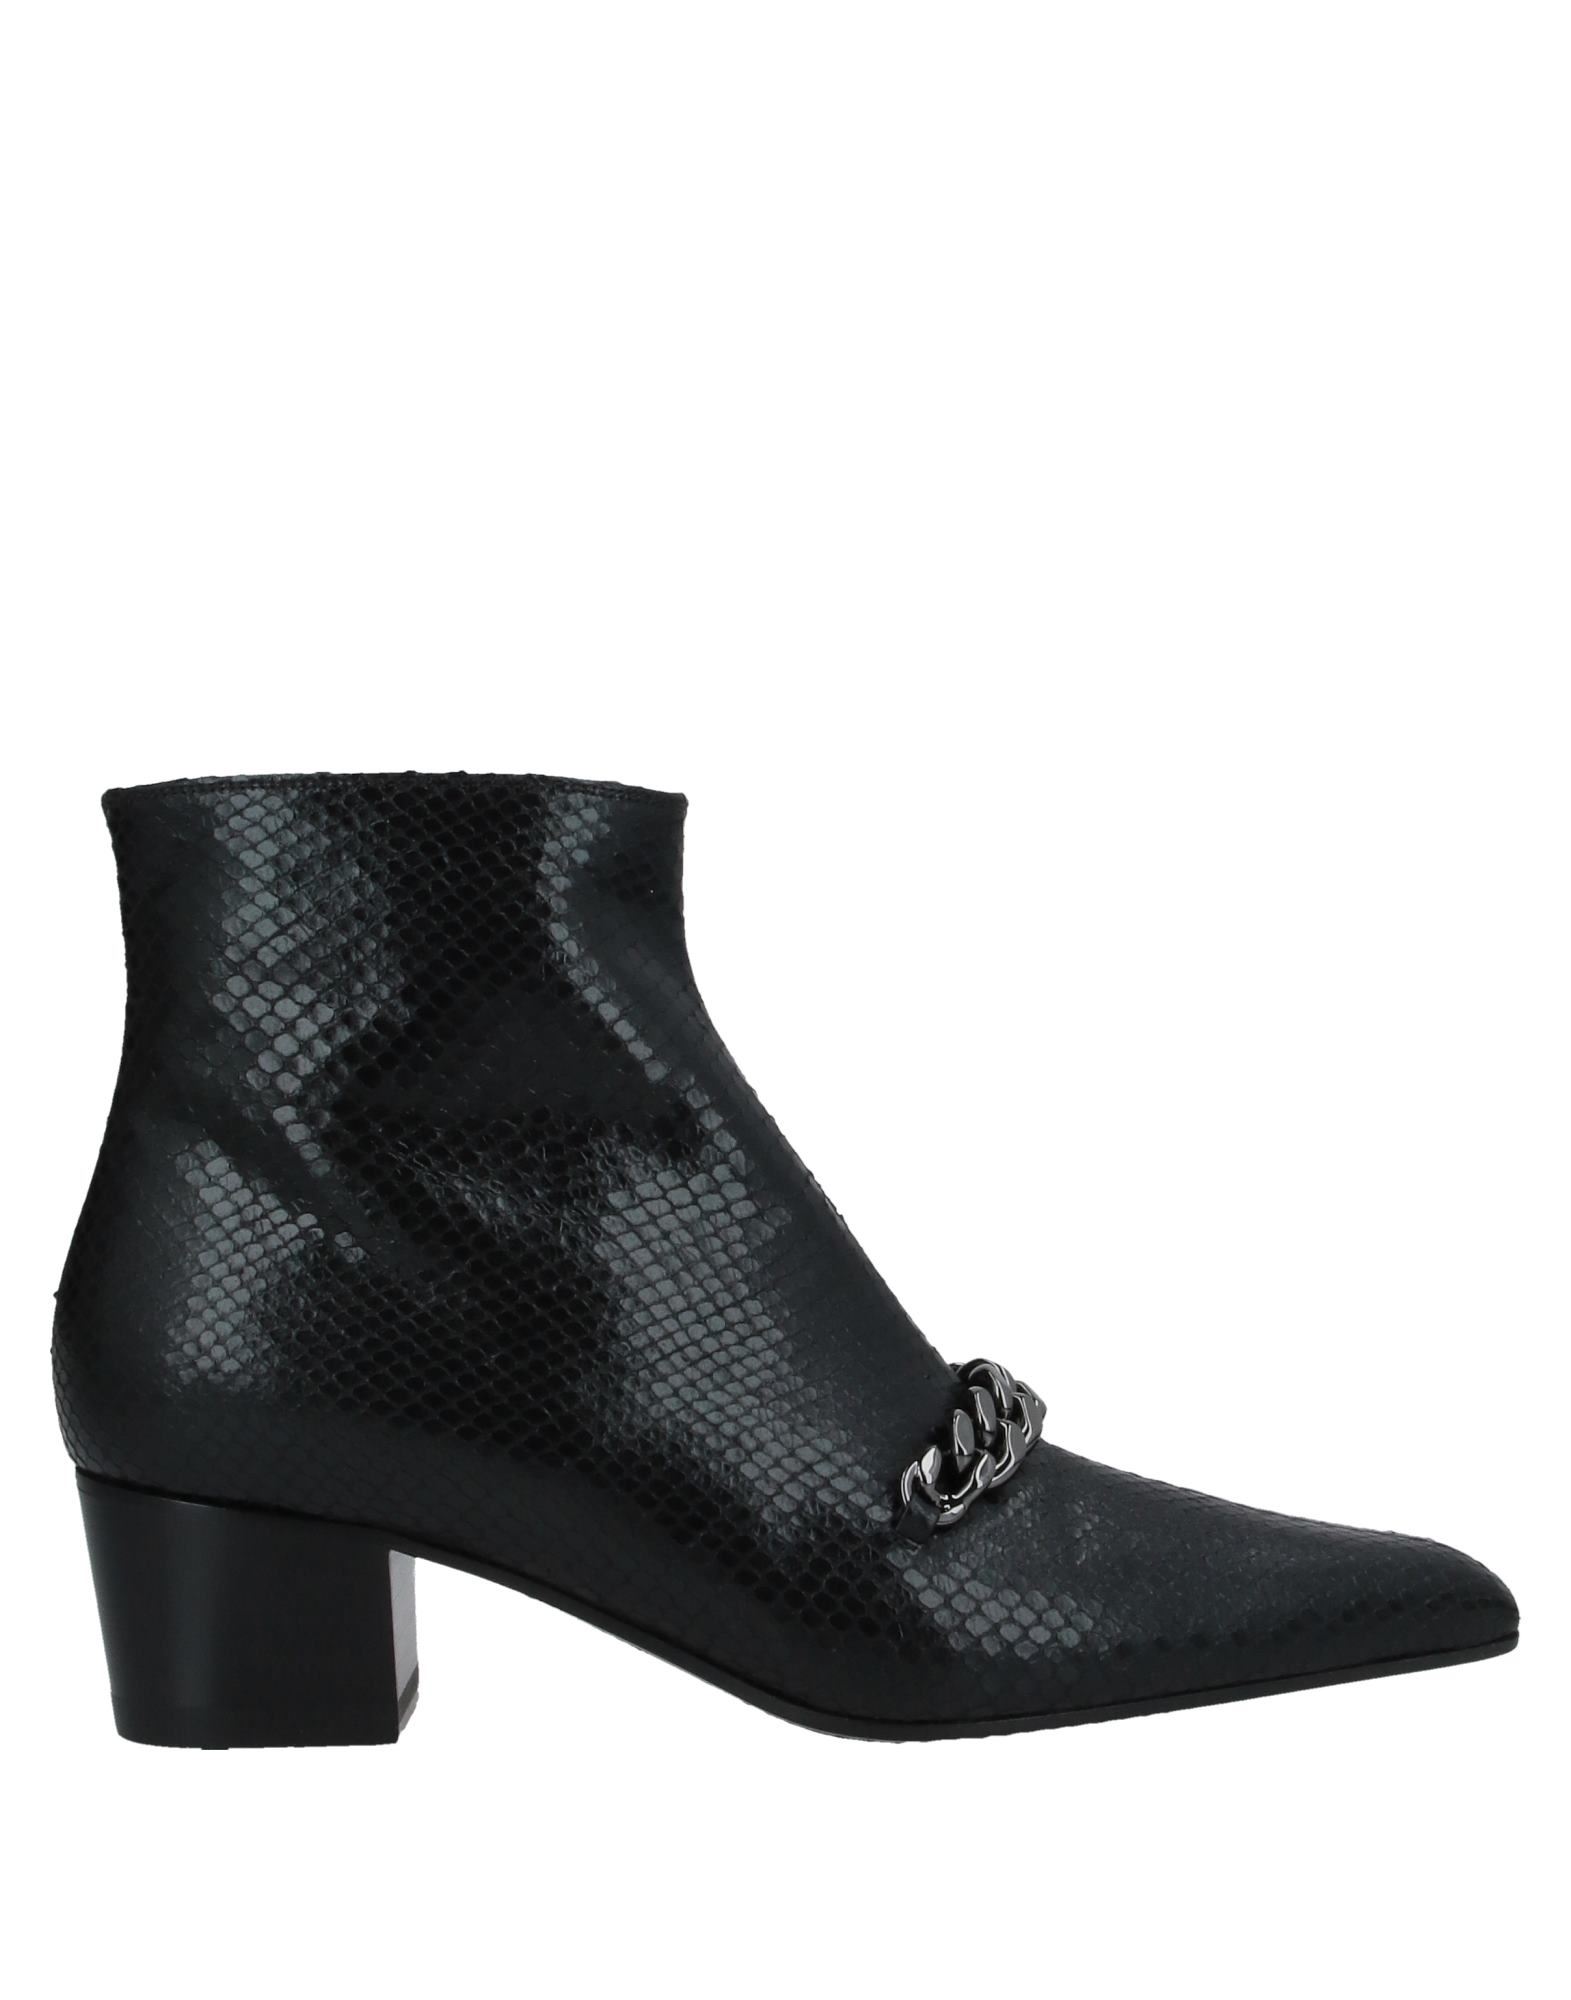 TOM FORD Ankle boots | Smart Closet